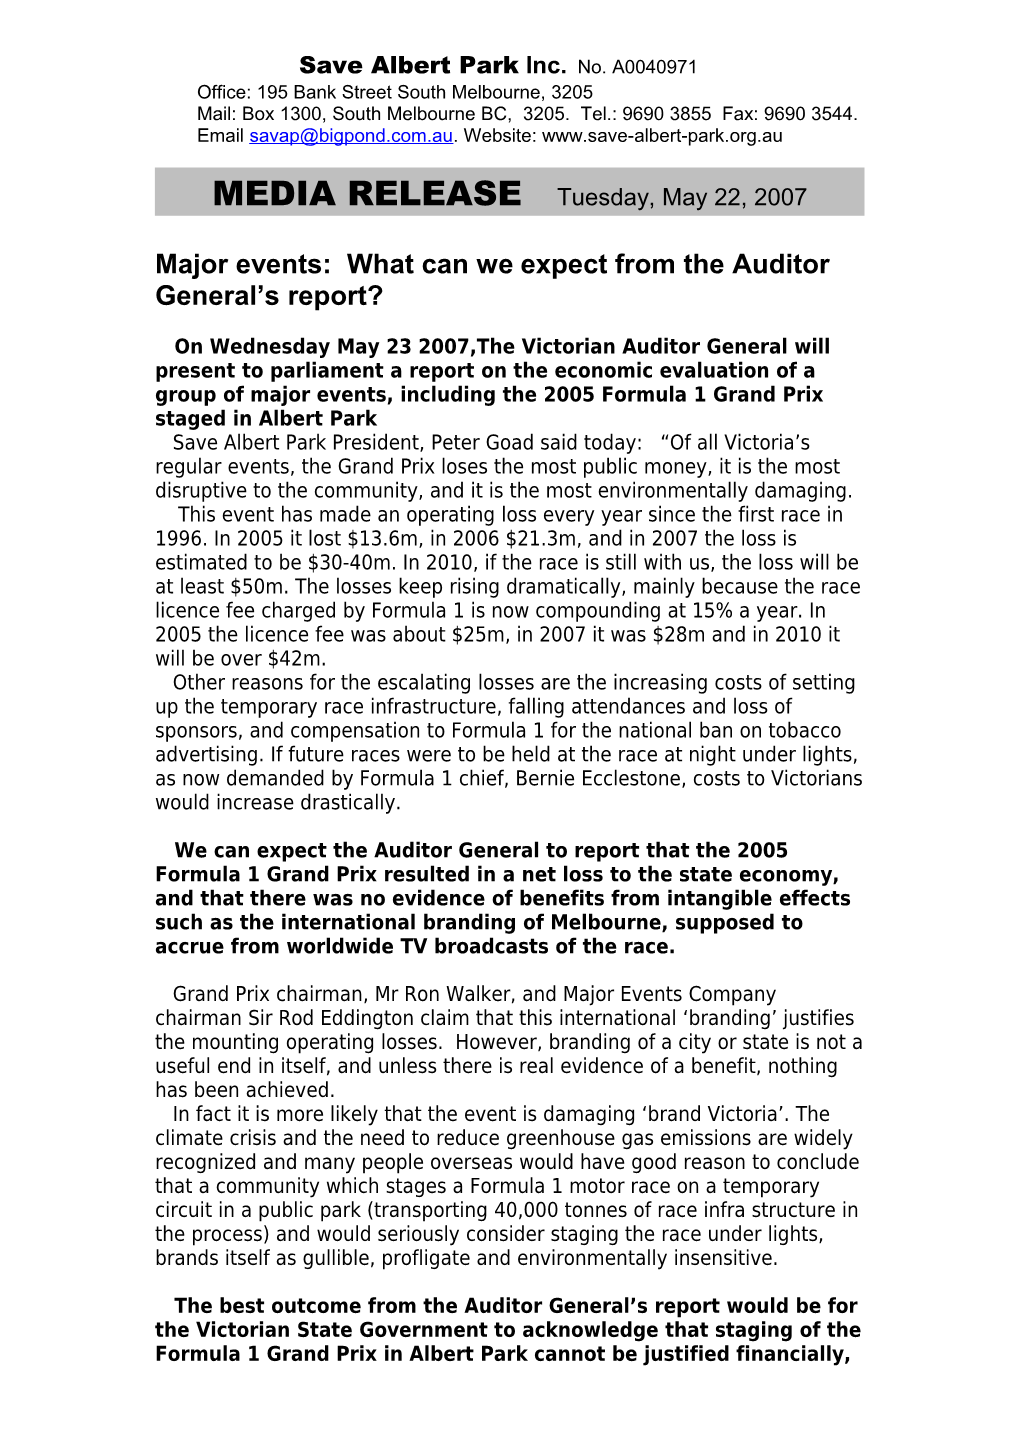 Major Events: What Can We Expect from the Auditor General S Report